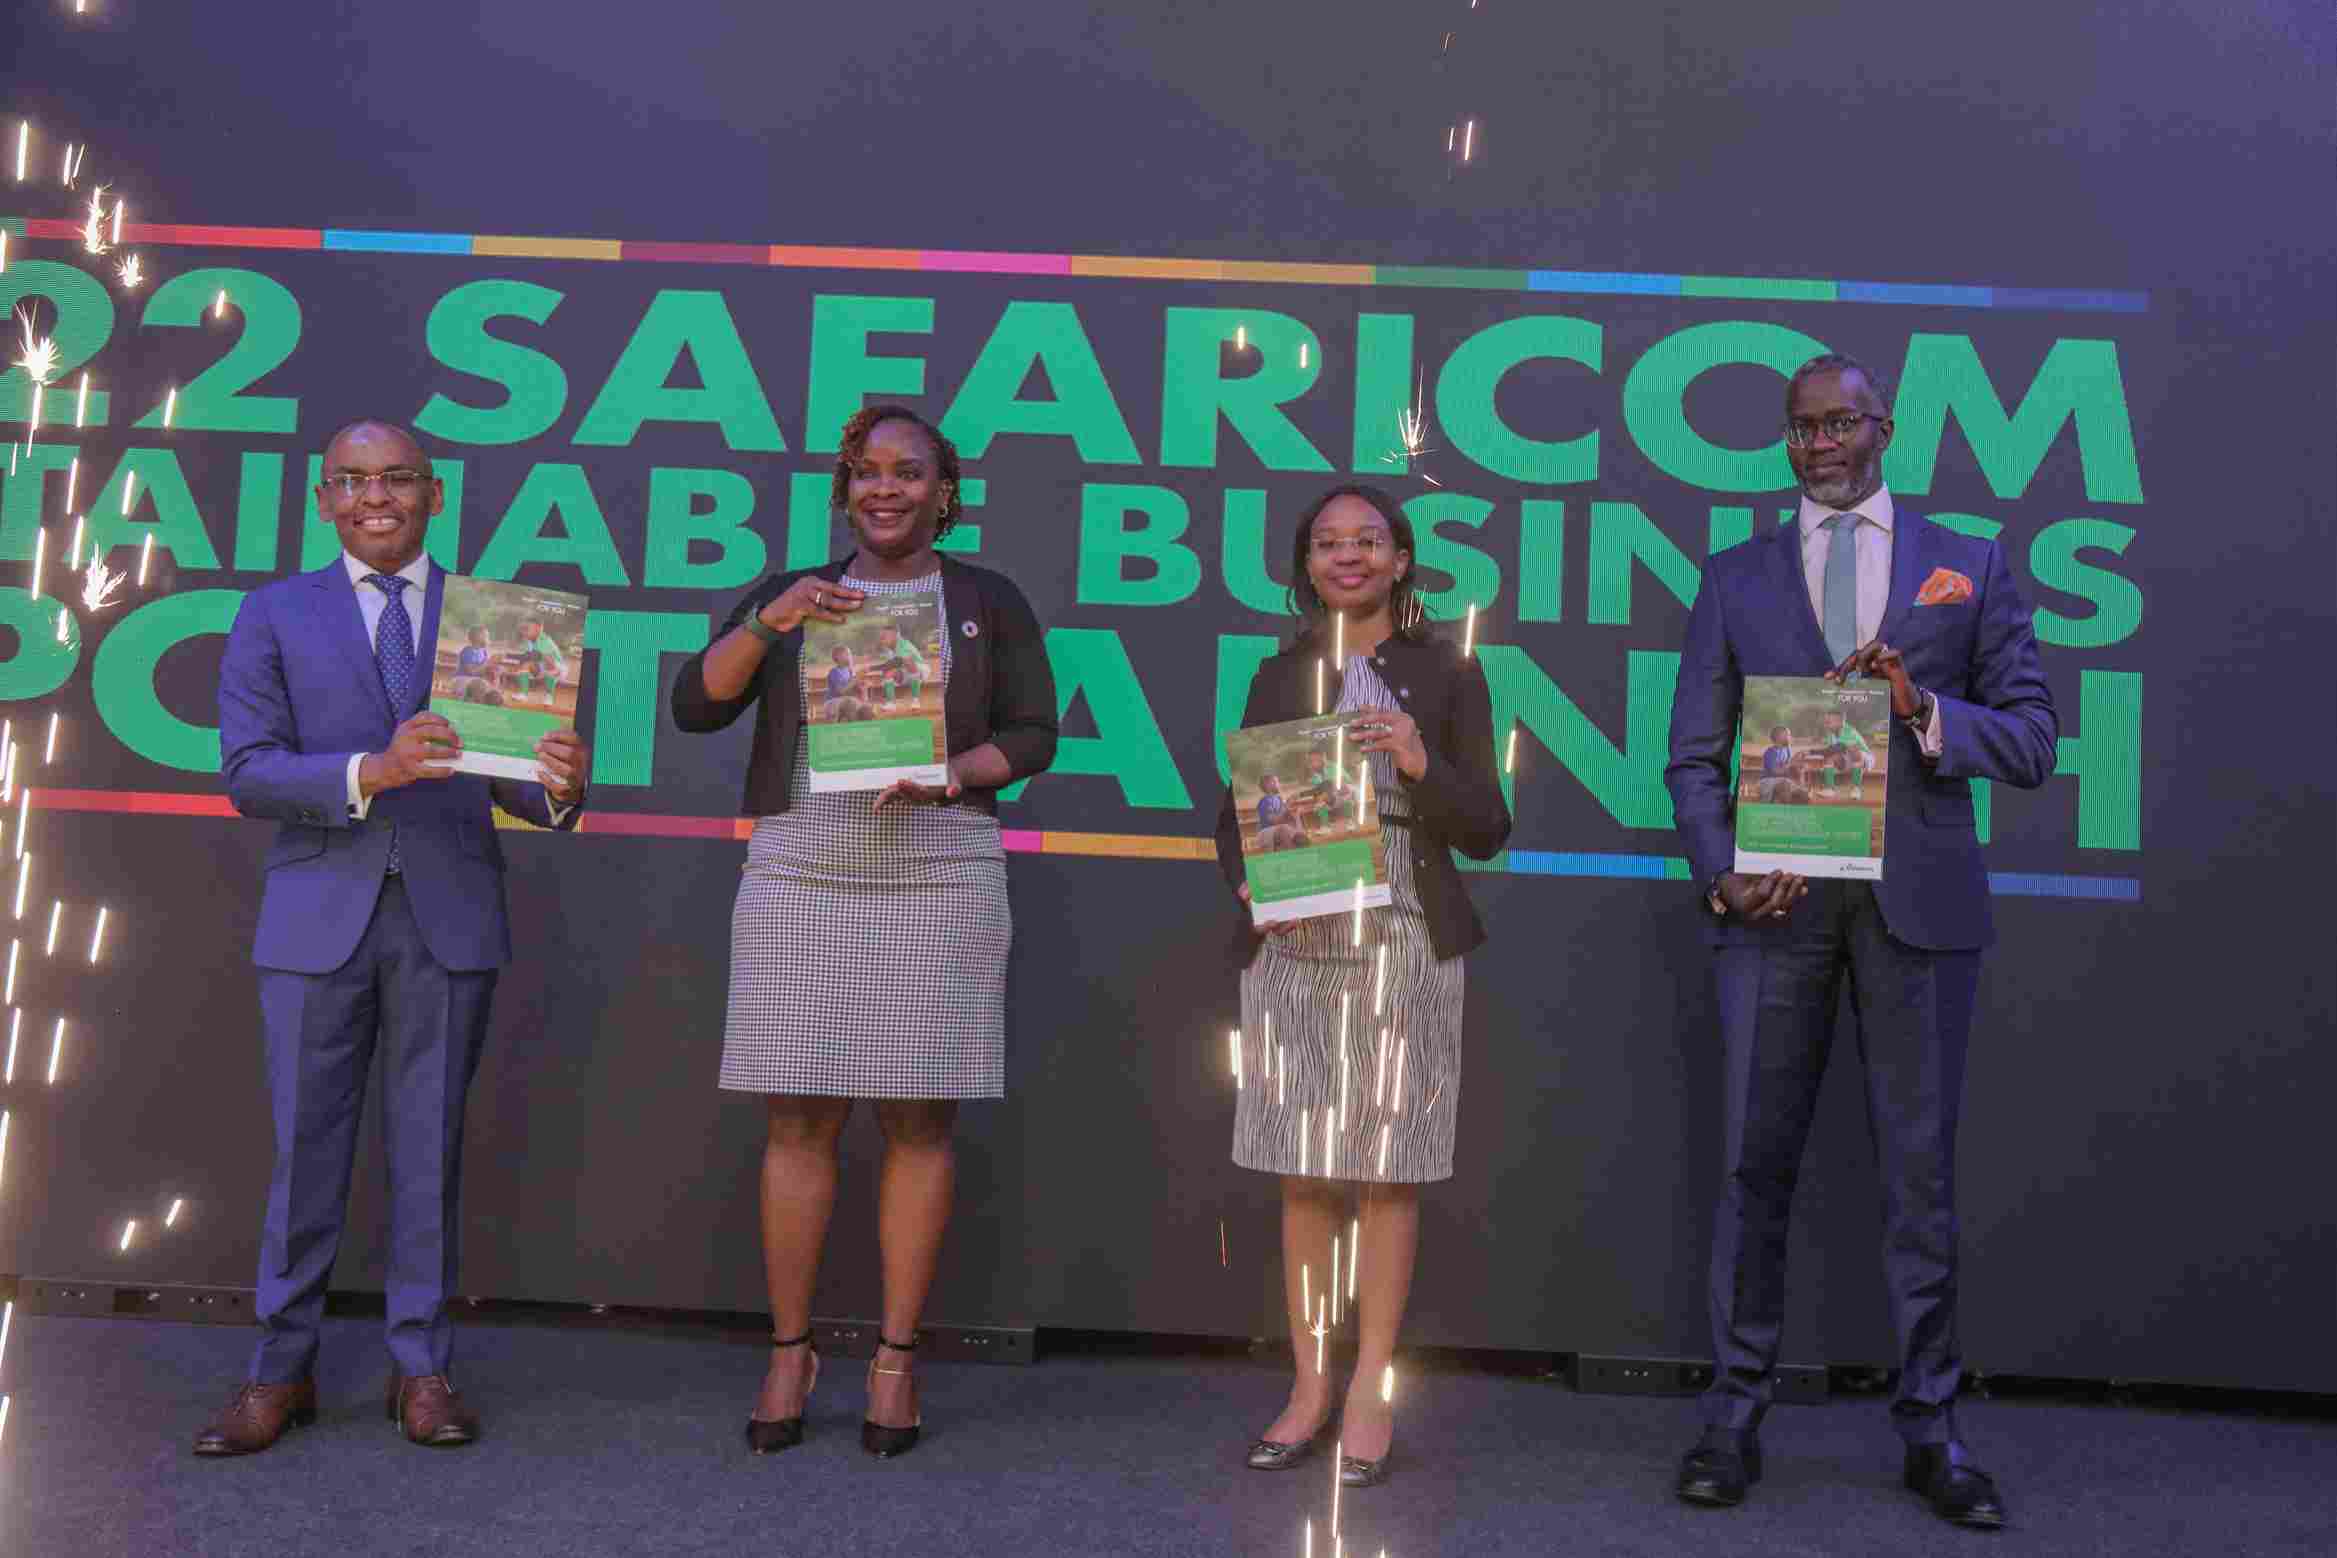 Safaricom’s latest Sustainability report titled Partnering for Growth: Transforming Lives, covers the company’s last fiscal year from 01st April 2021 to 31st March 2022 and highlights the progress it has made towards building a more sustainable business